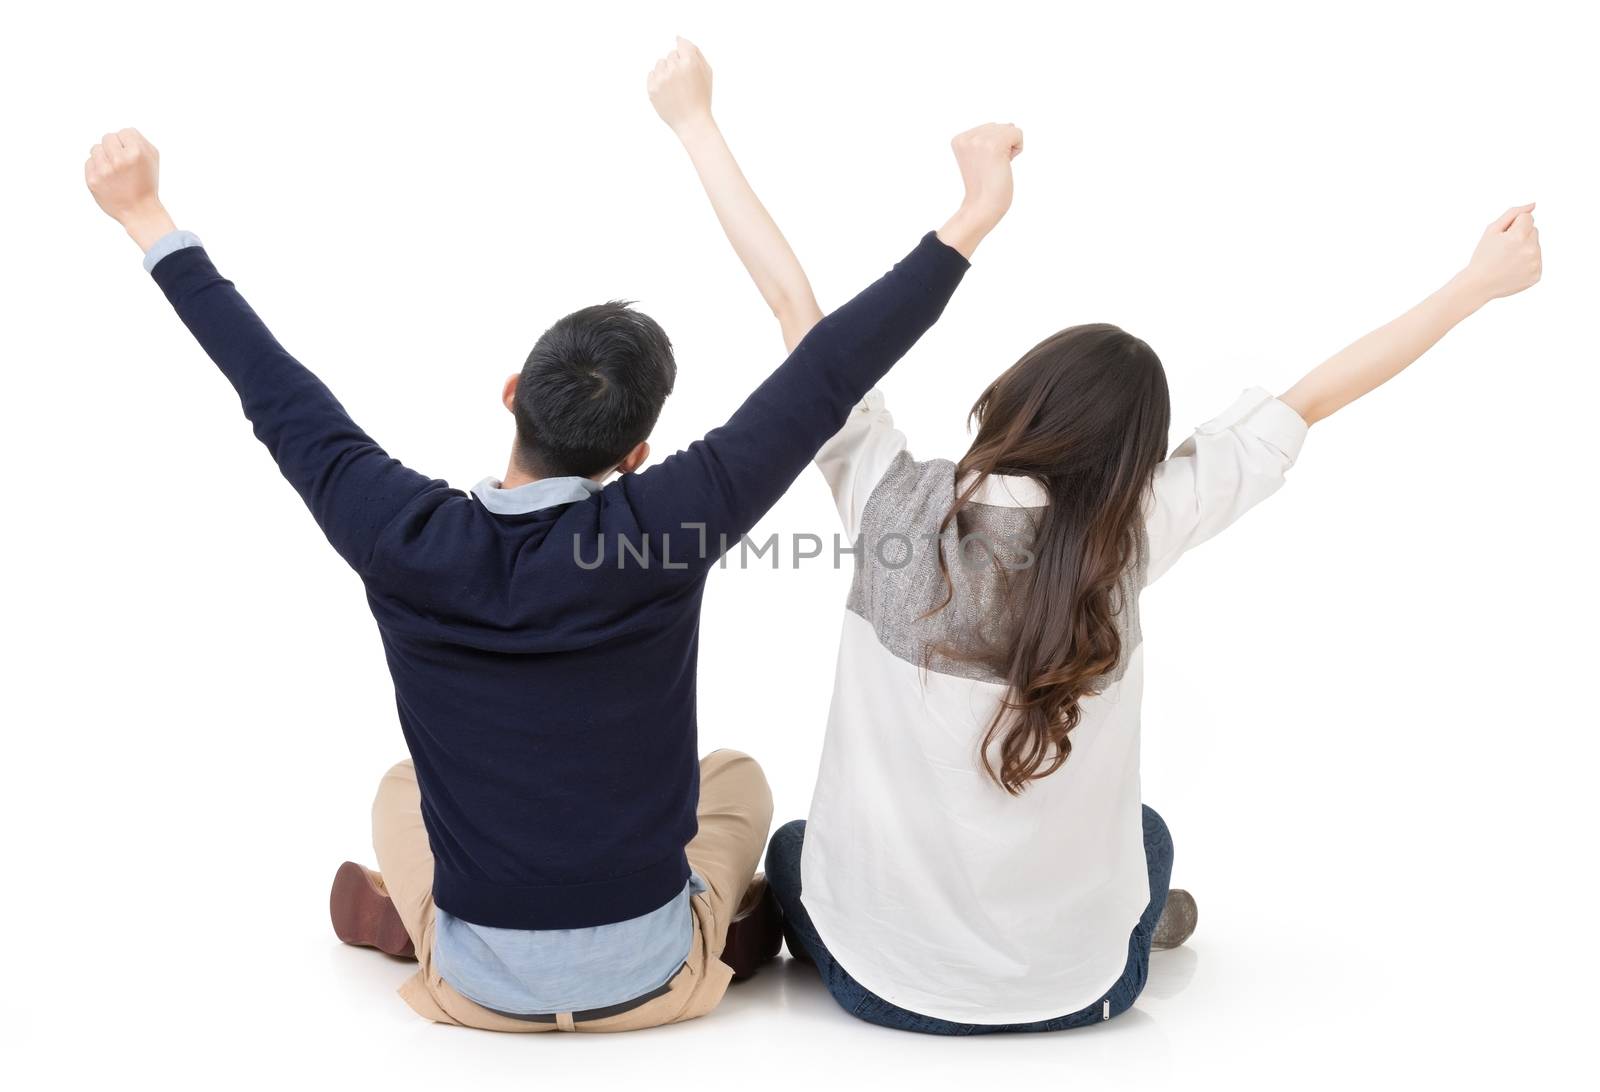 Asian young couple sitting on ground and stretching their hands feeling free, full length portrait on white background.